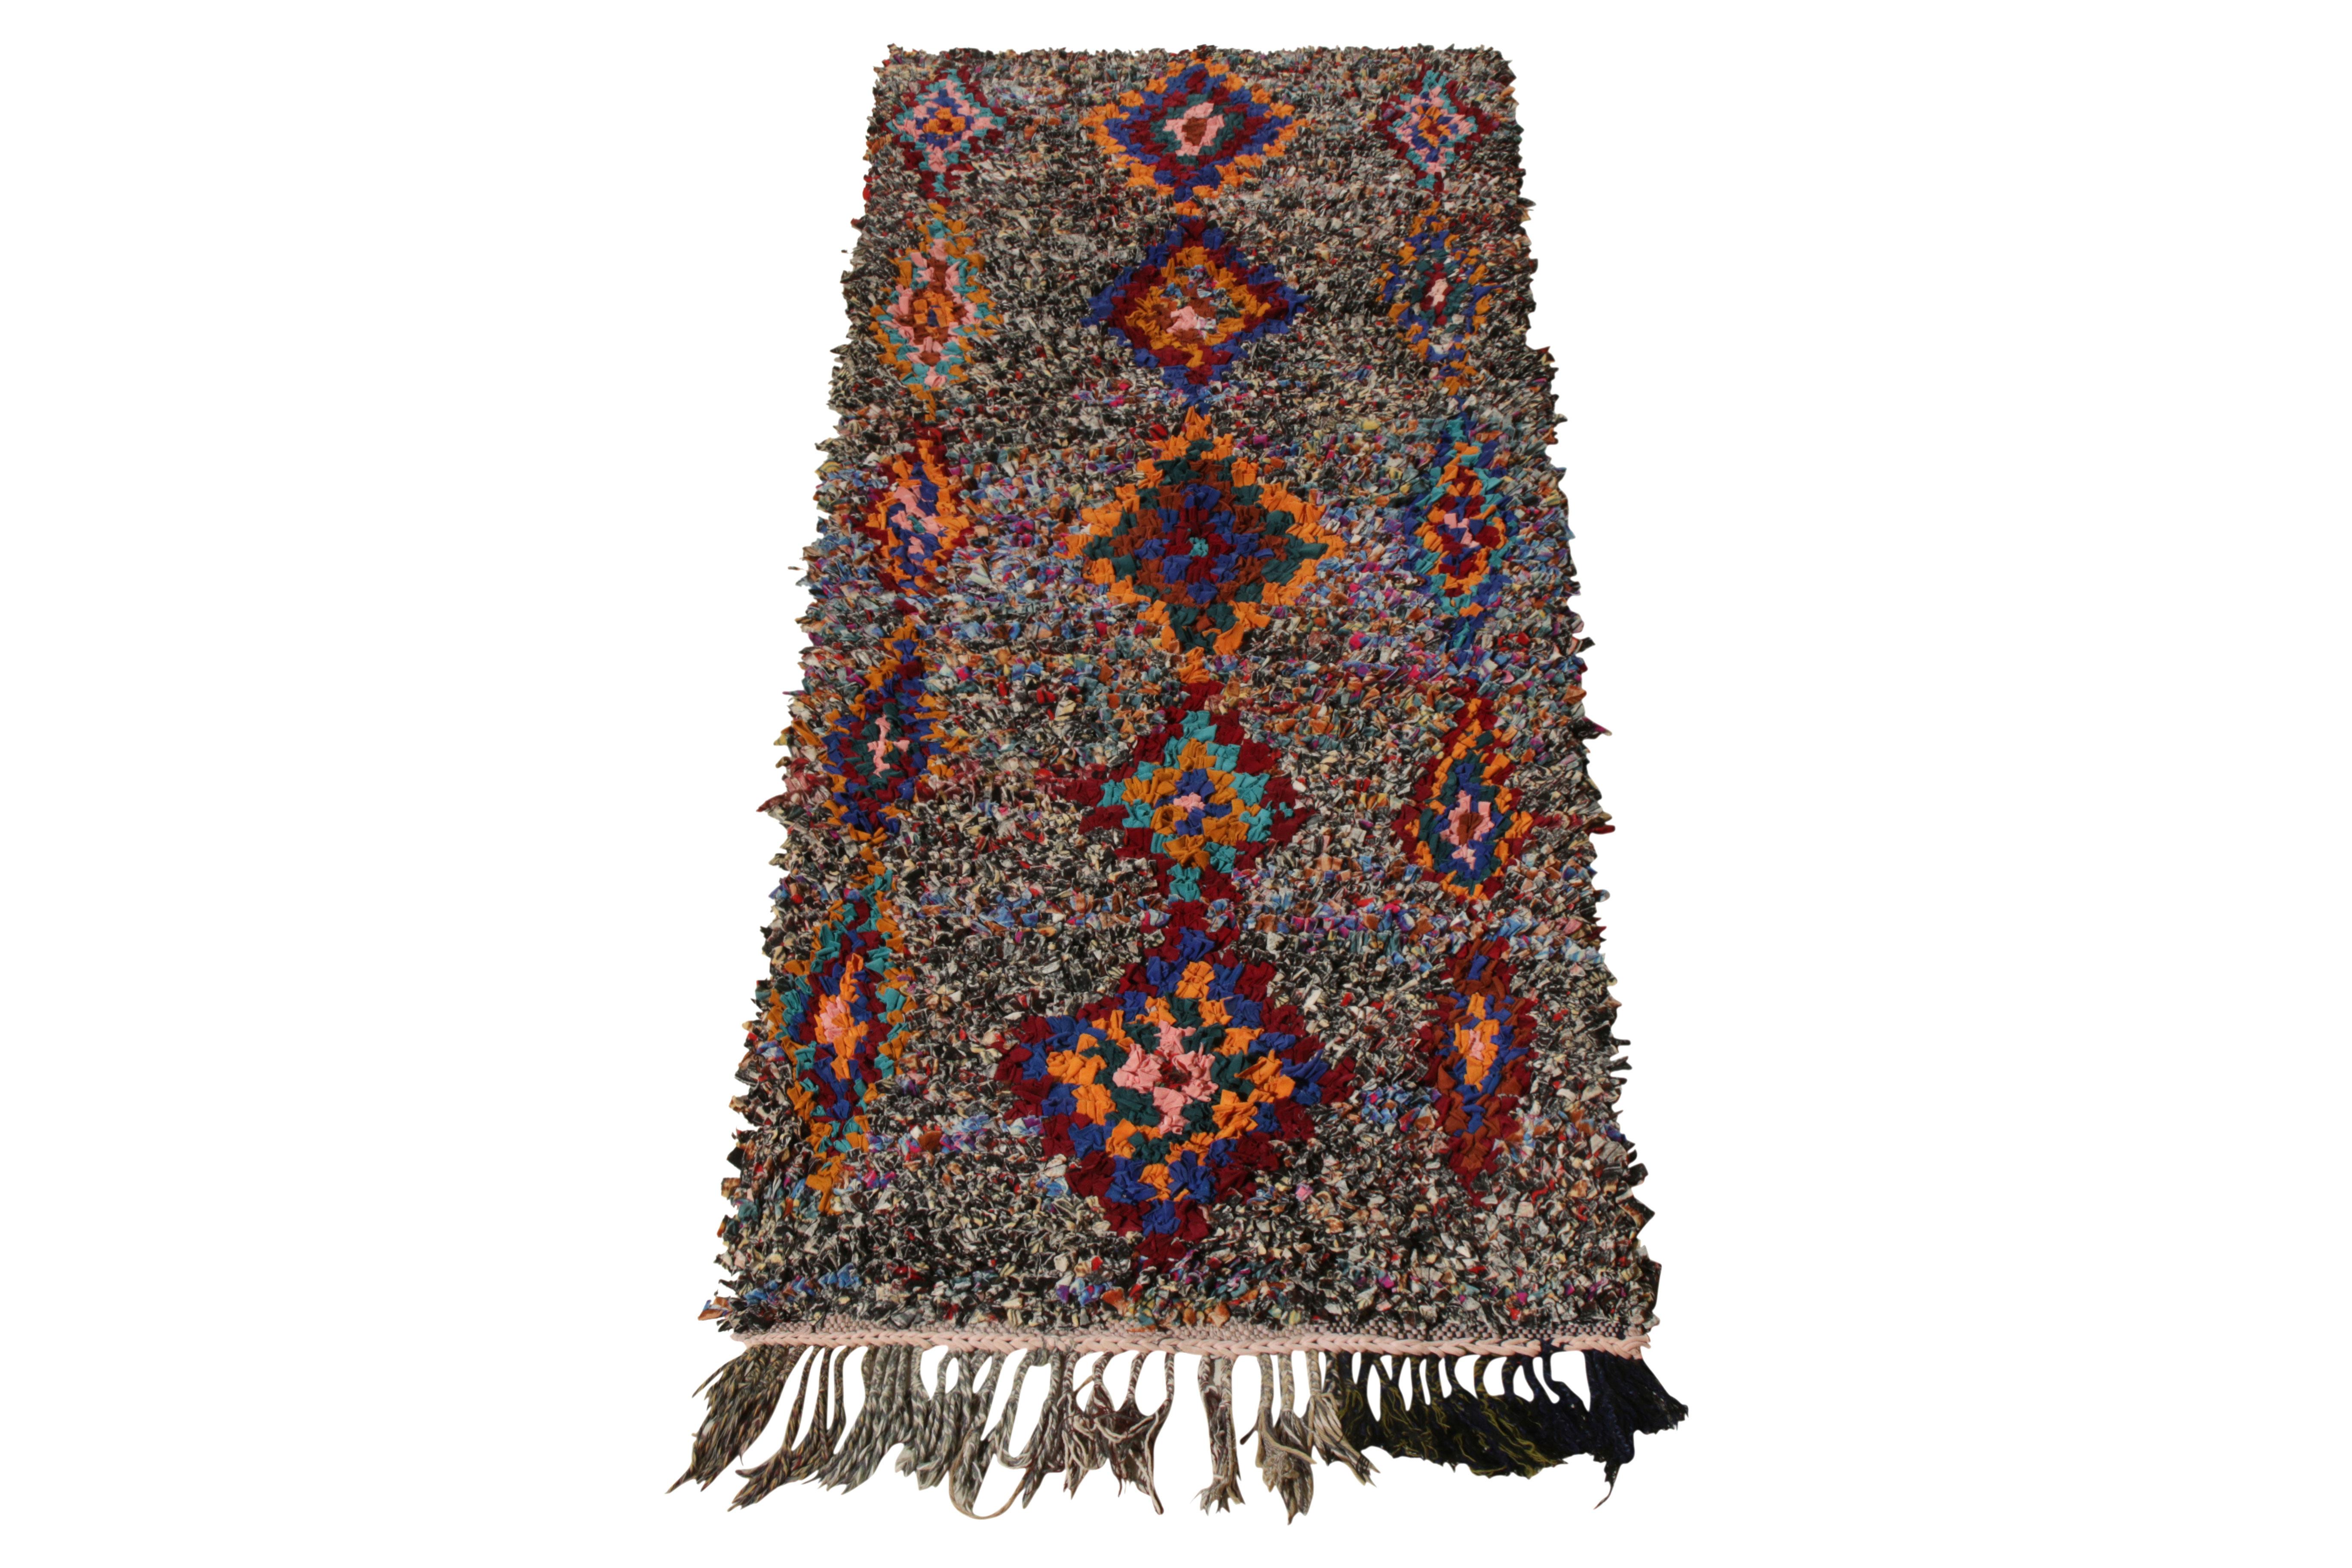 A 3x7 vintage Berber style Moroccan runner from the 1950s joining Rug & Kilim’s Antique & Vintage collection. Hand-knotted in Boucherouite fabric, the piece thrives with tribal sensibilities in a shag/high pile. Along with its exemplary textural